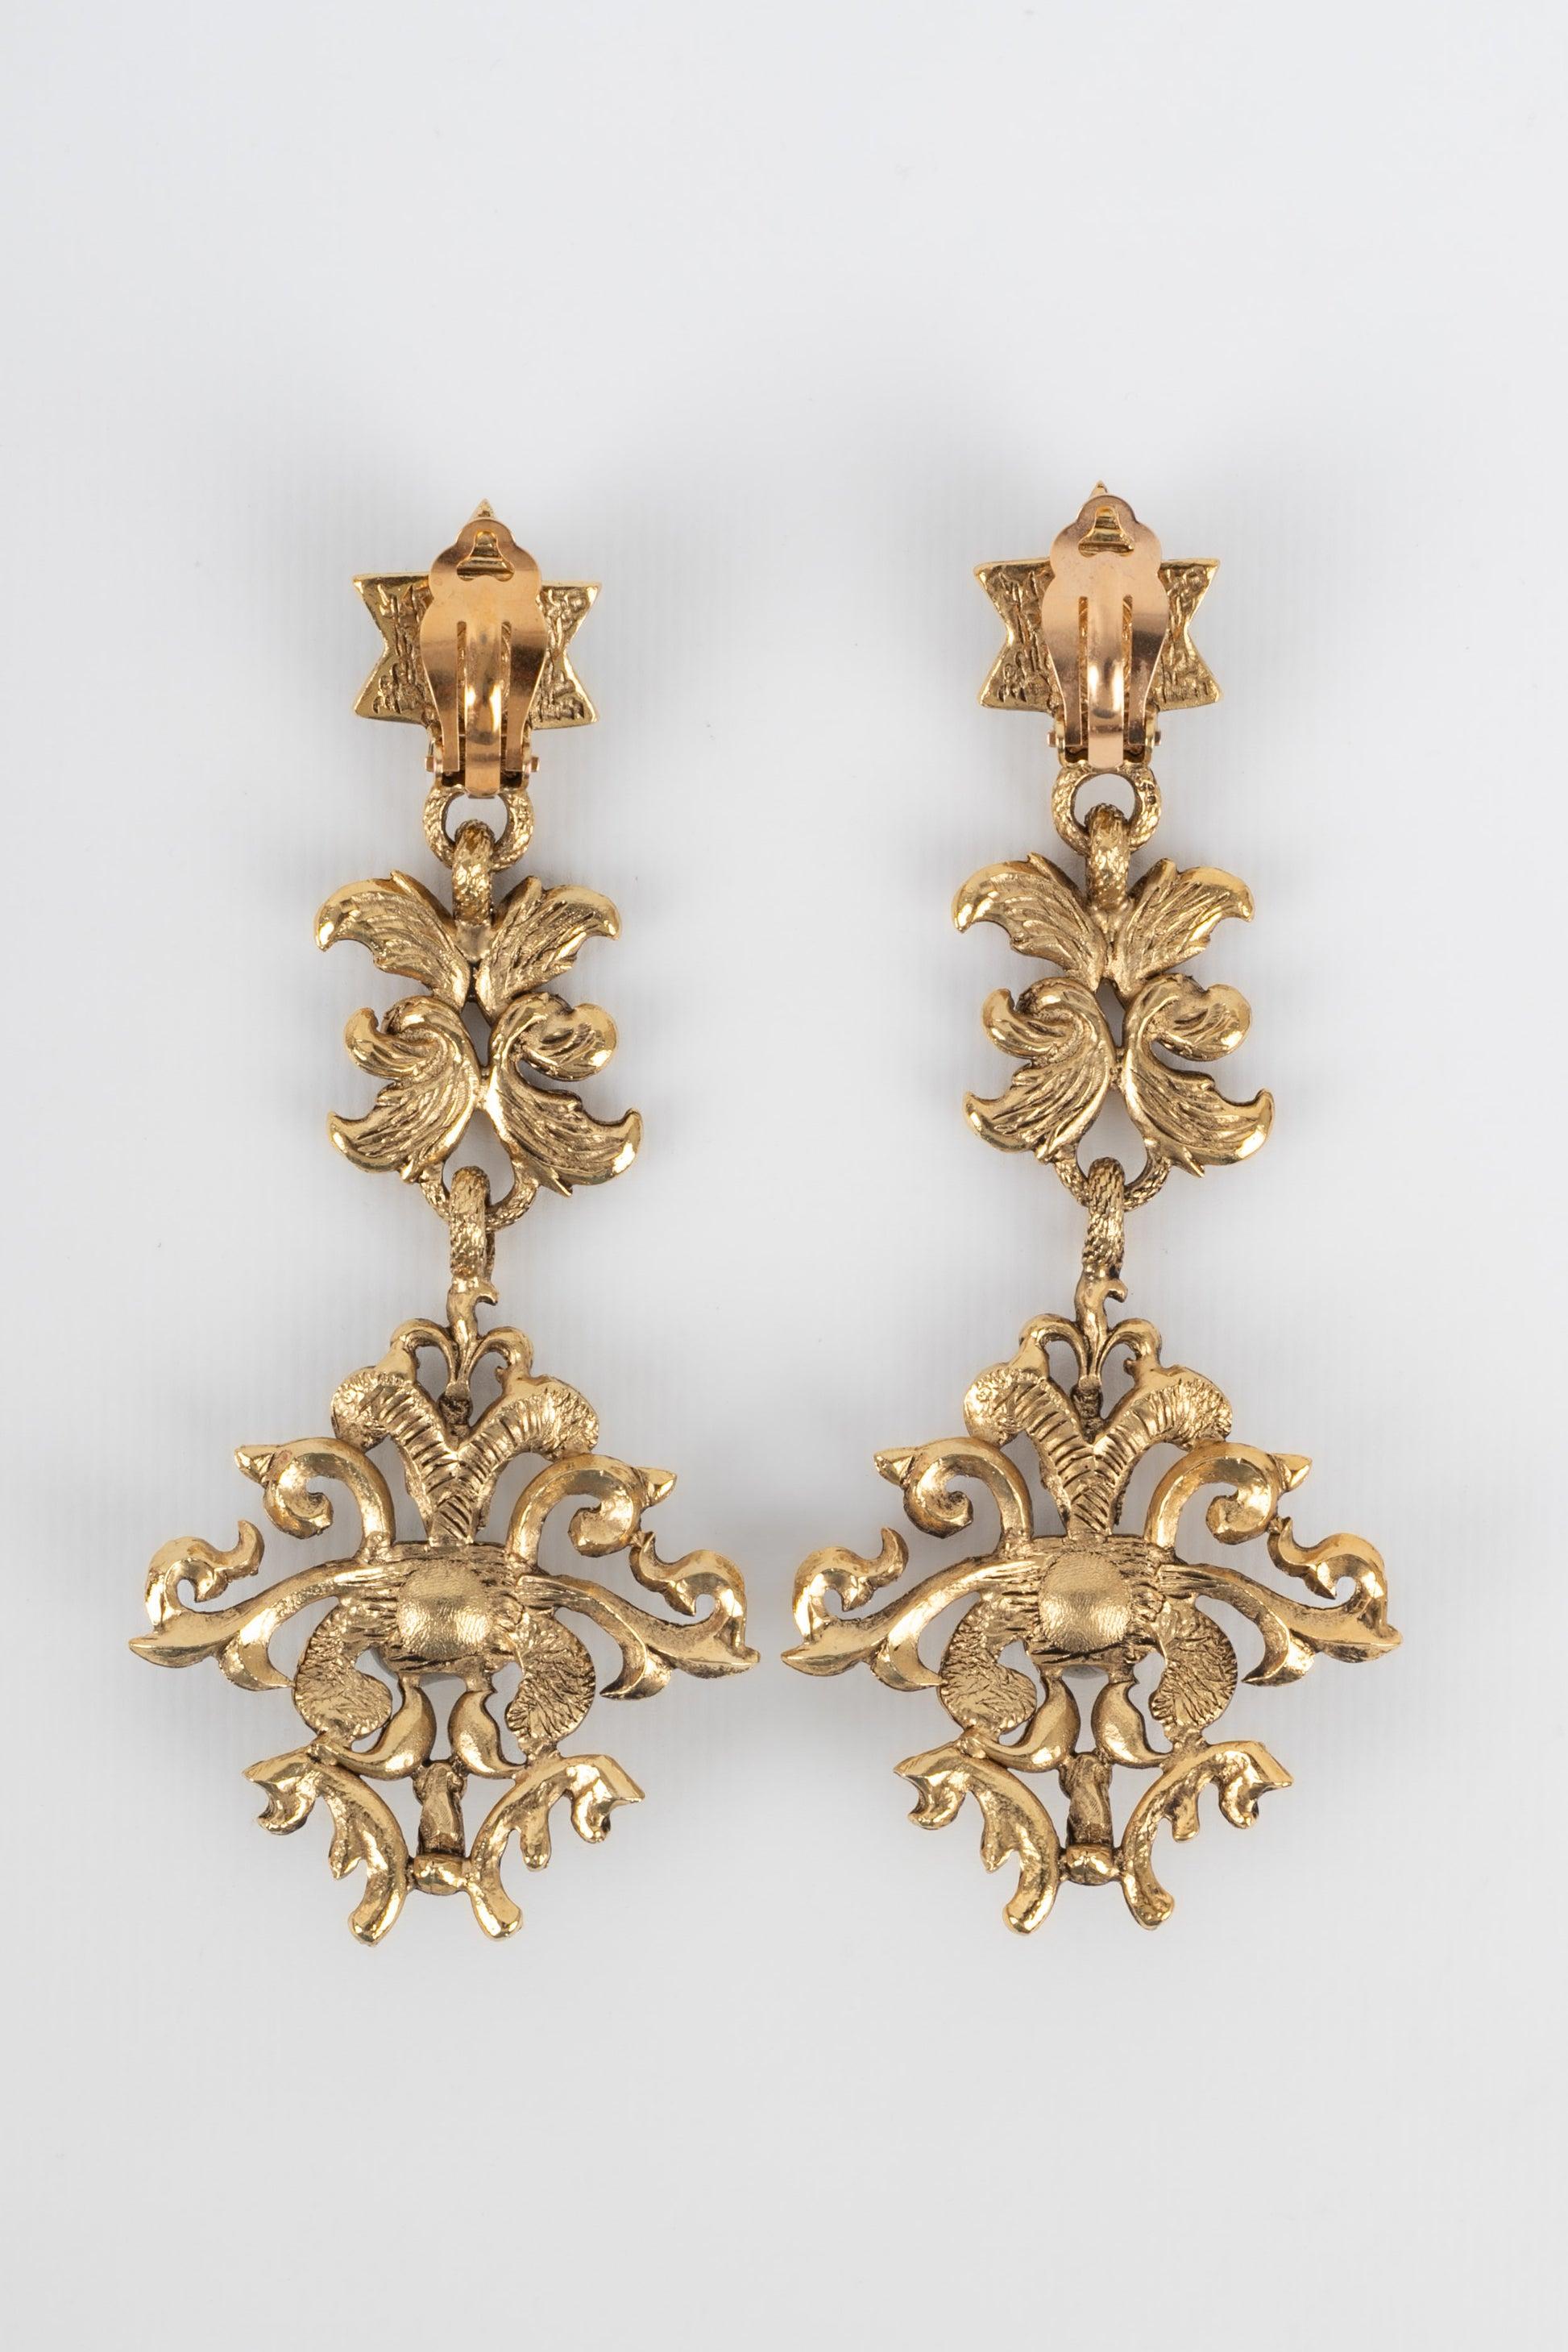 Dior - Impressive golden metal earrings.

Additional information:
Condition: Very good condition
Dimensions: Length: 11.5 cm

Seller Reference: BO213